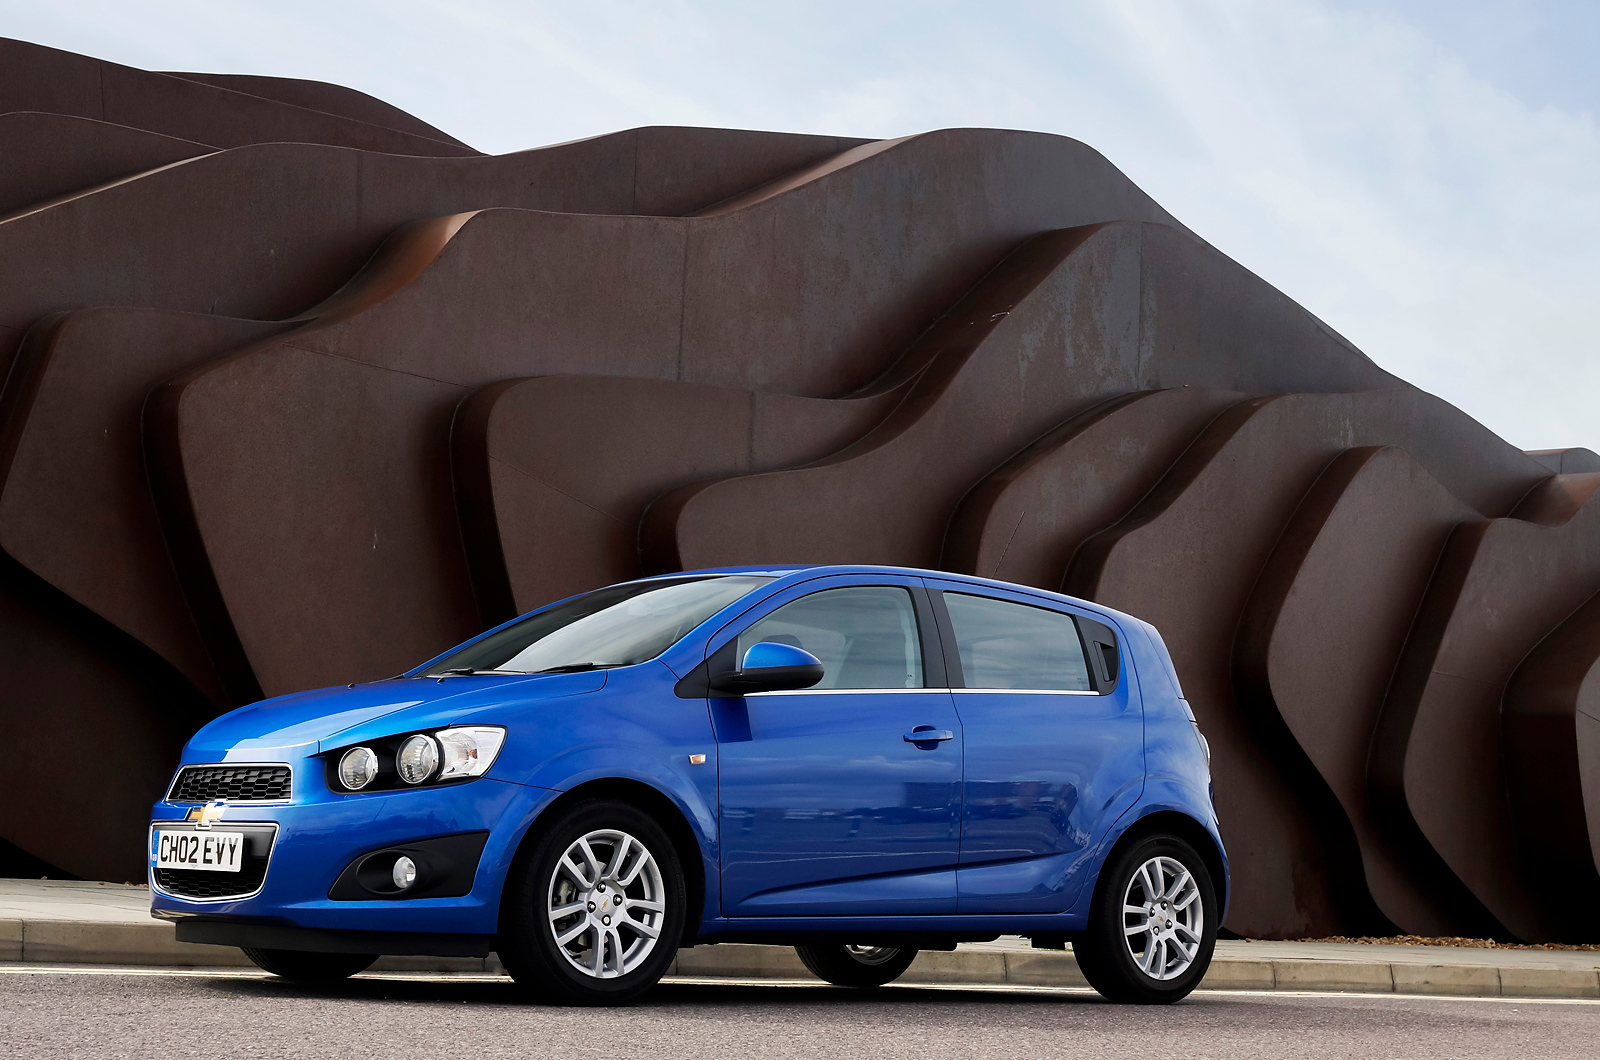 Chevrolet Aveo (2012-2015) used car review, Car review